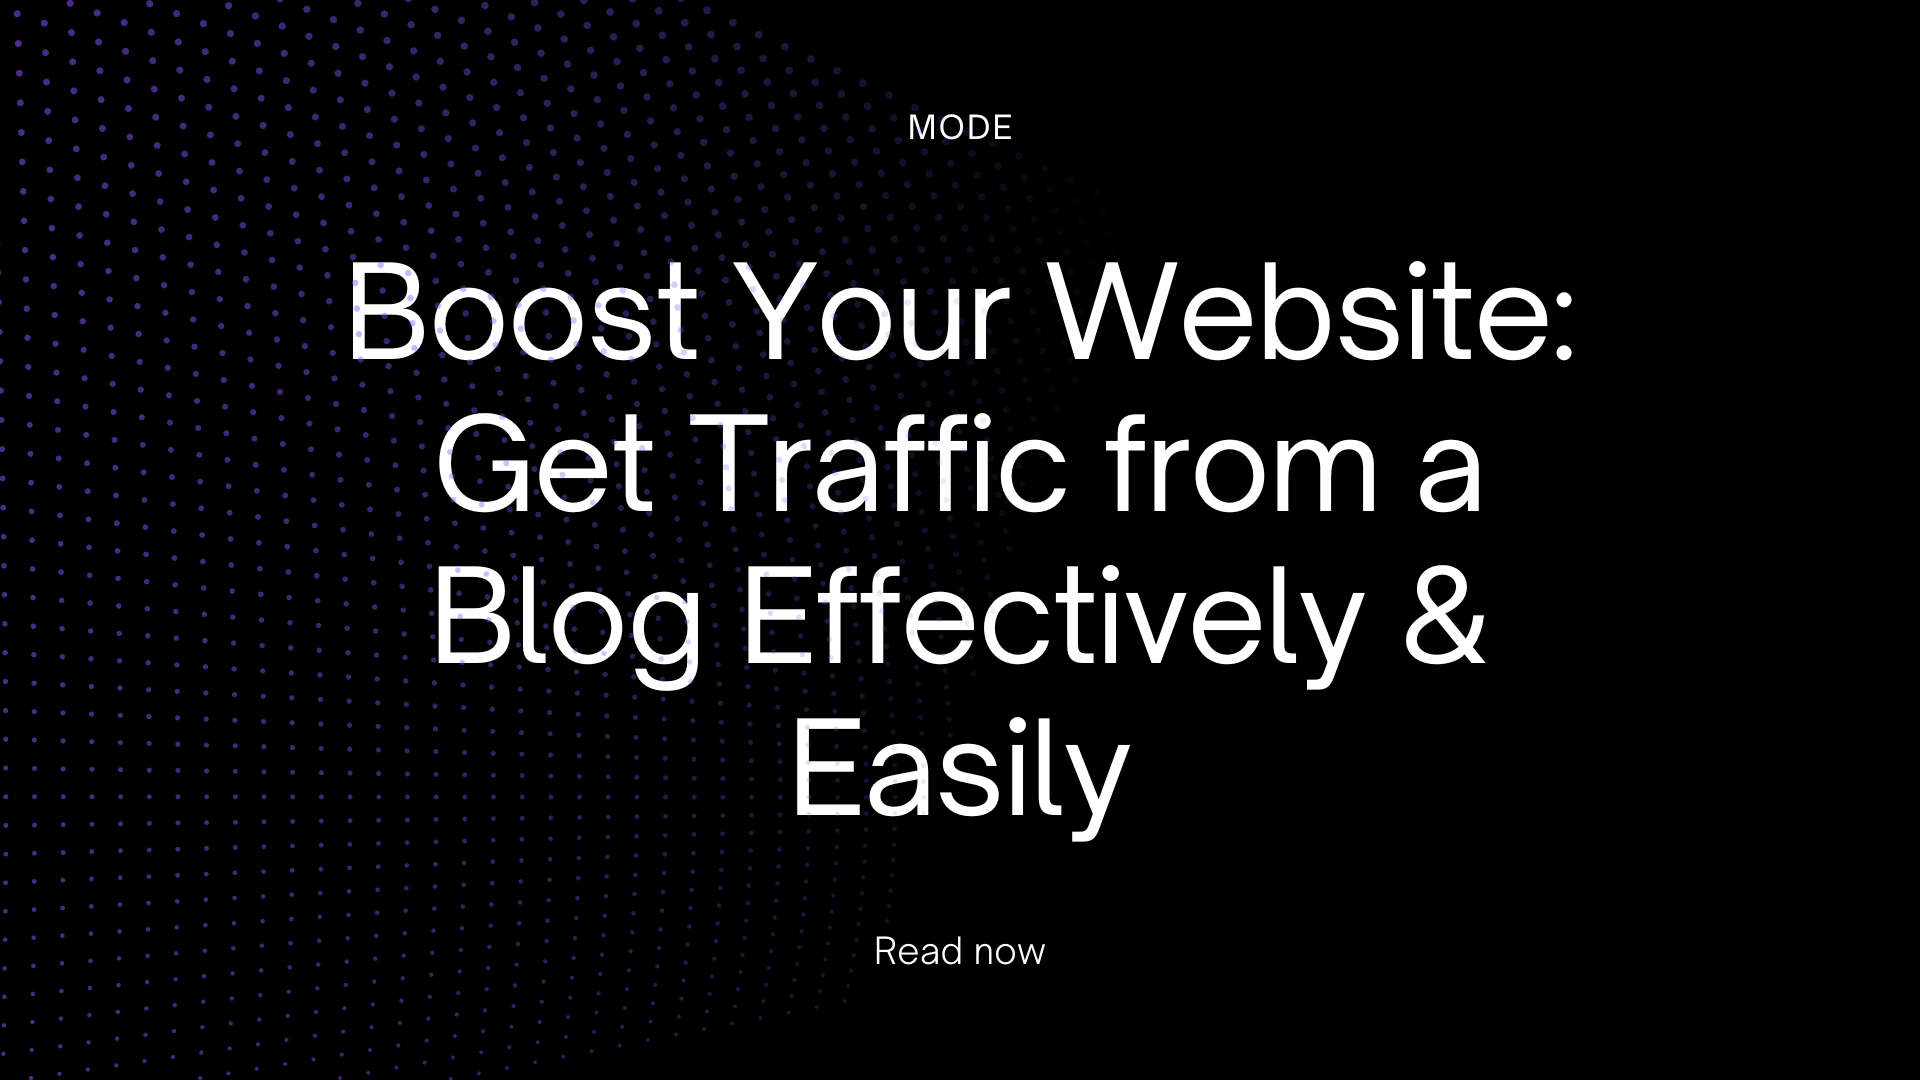 Boost Your Website: Get Traffic from a Blog Effectively & Easily